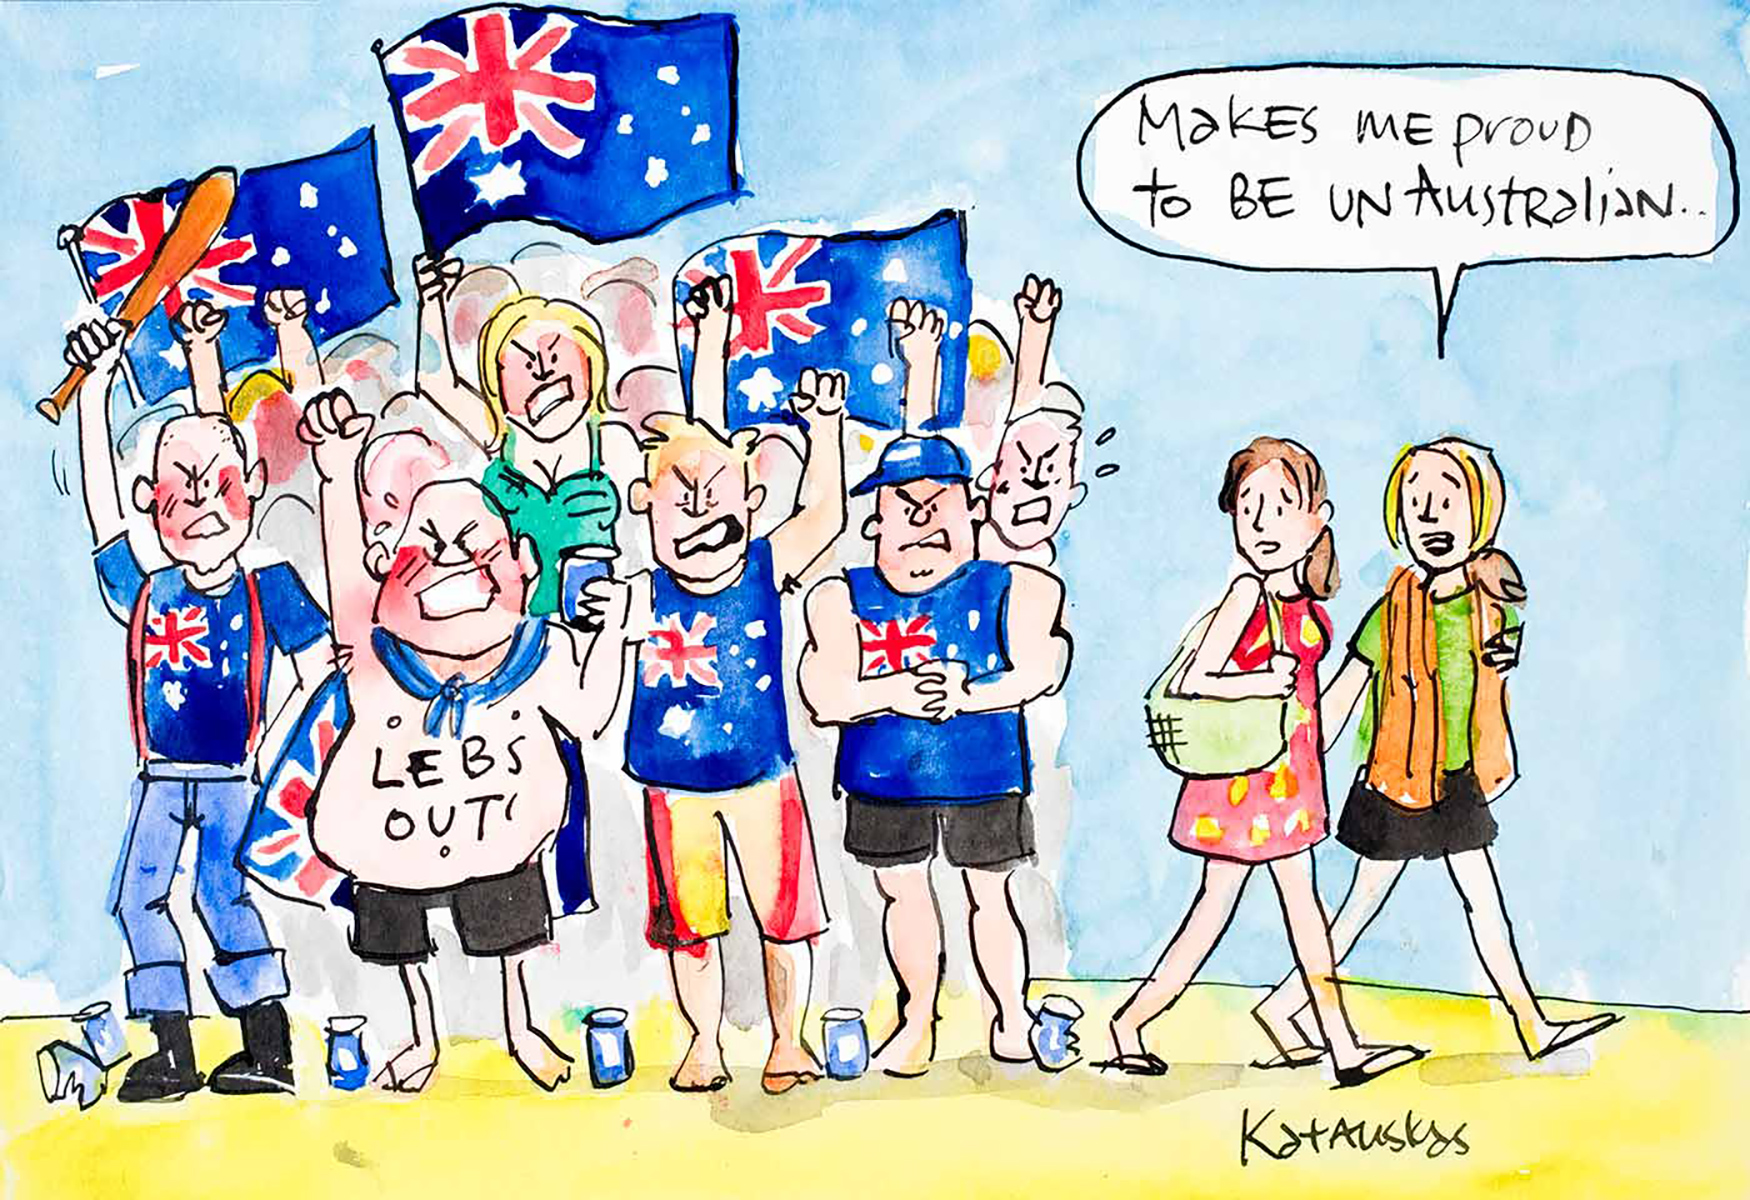 Cartoon of a group of angry looking people holding up Australian flags and baseball bats, wearing Australian flag t-shirts and drinking beer, with two girls walking past commenting that this behaviour makes them proud to be unAustralian - click to view larger image